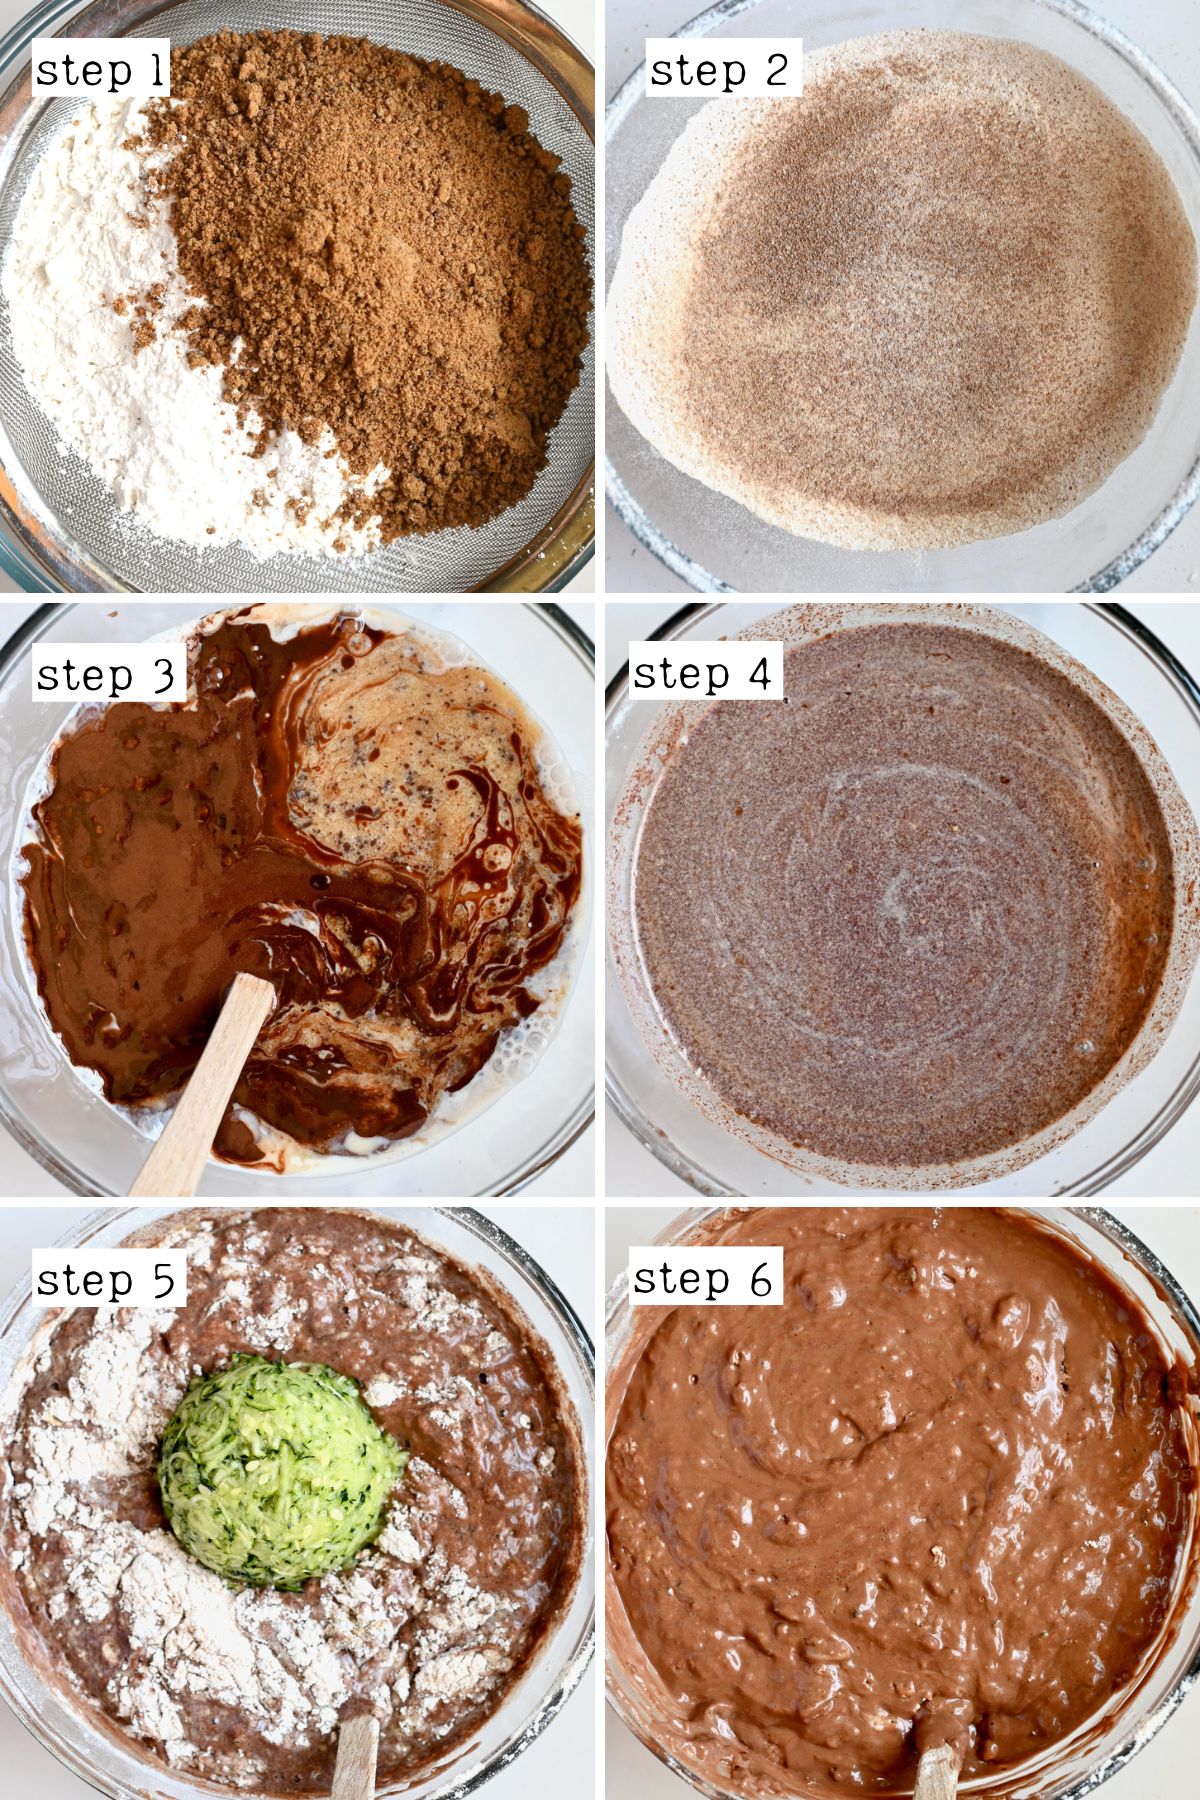 Steps for mixing dry and wet cake ingredients